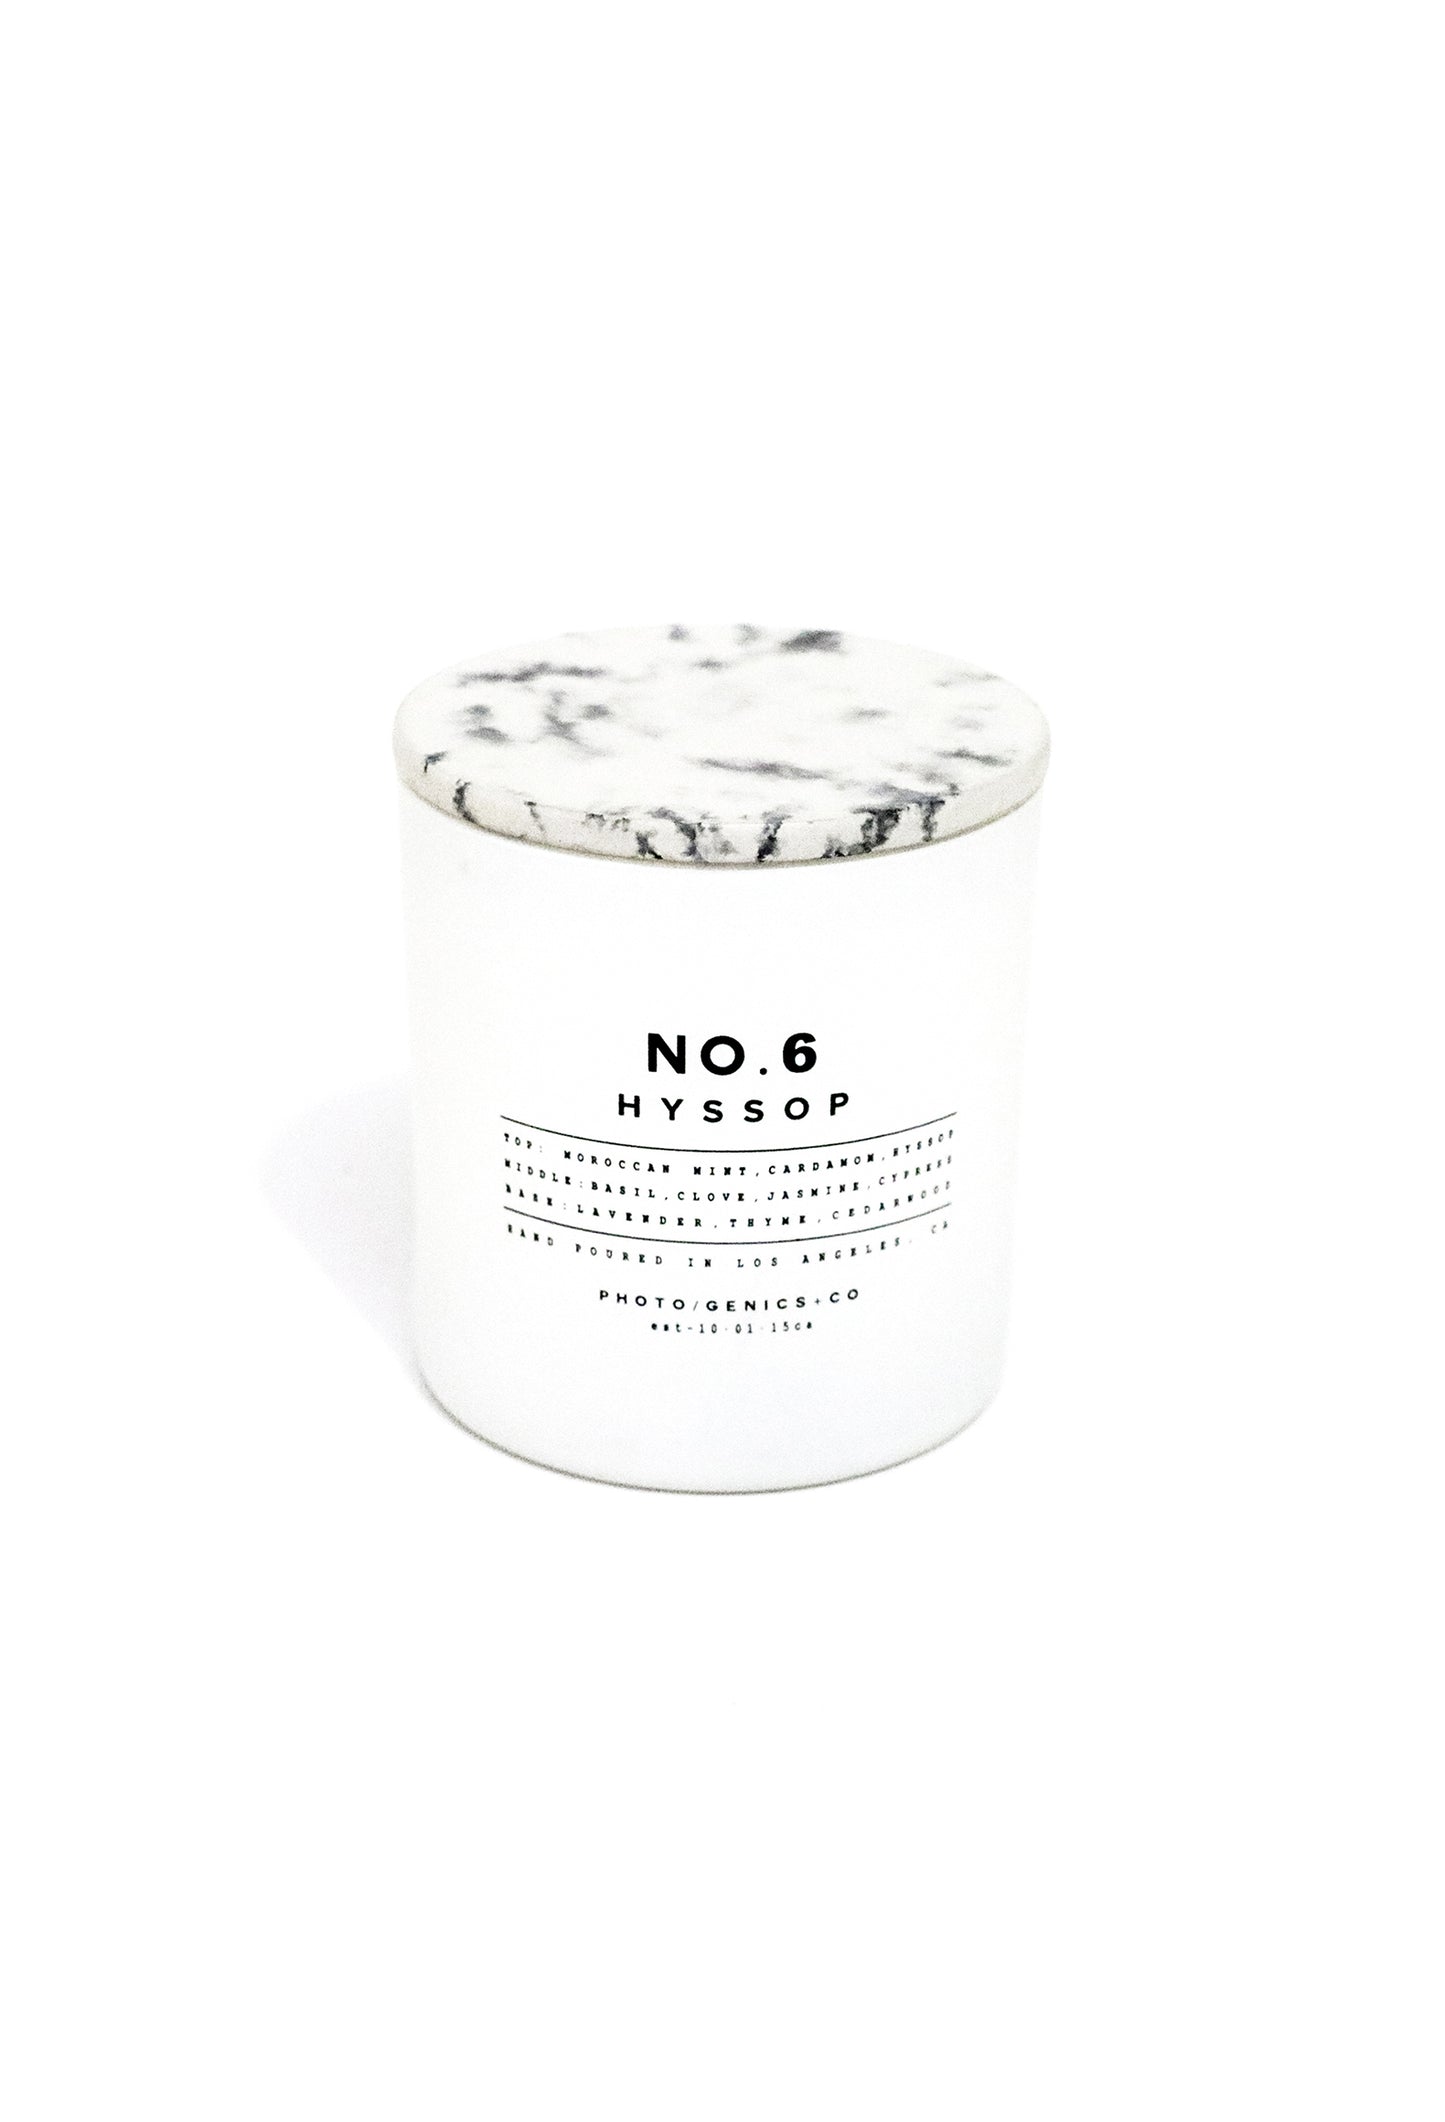 NO.6 HYSSOP GLASS CANDLE